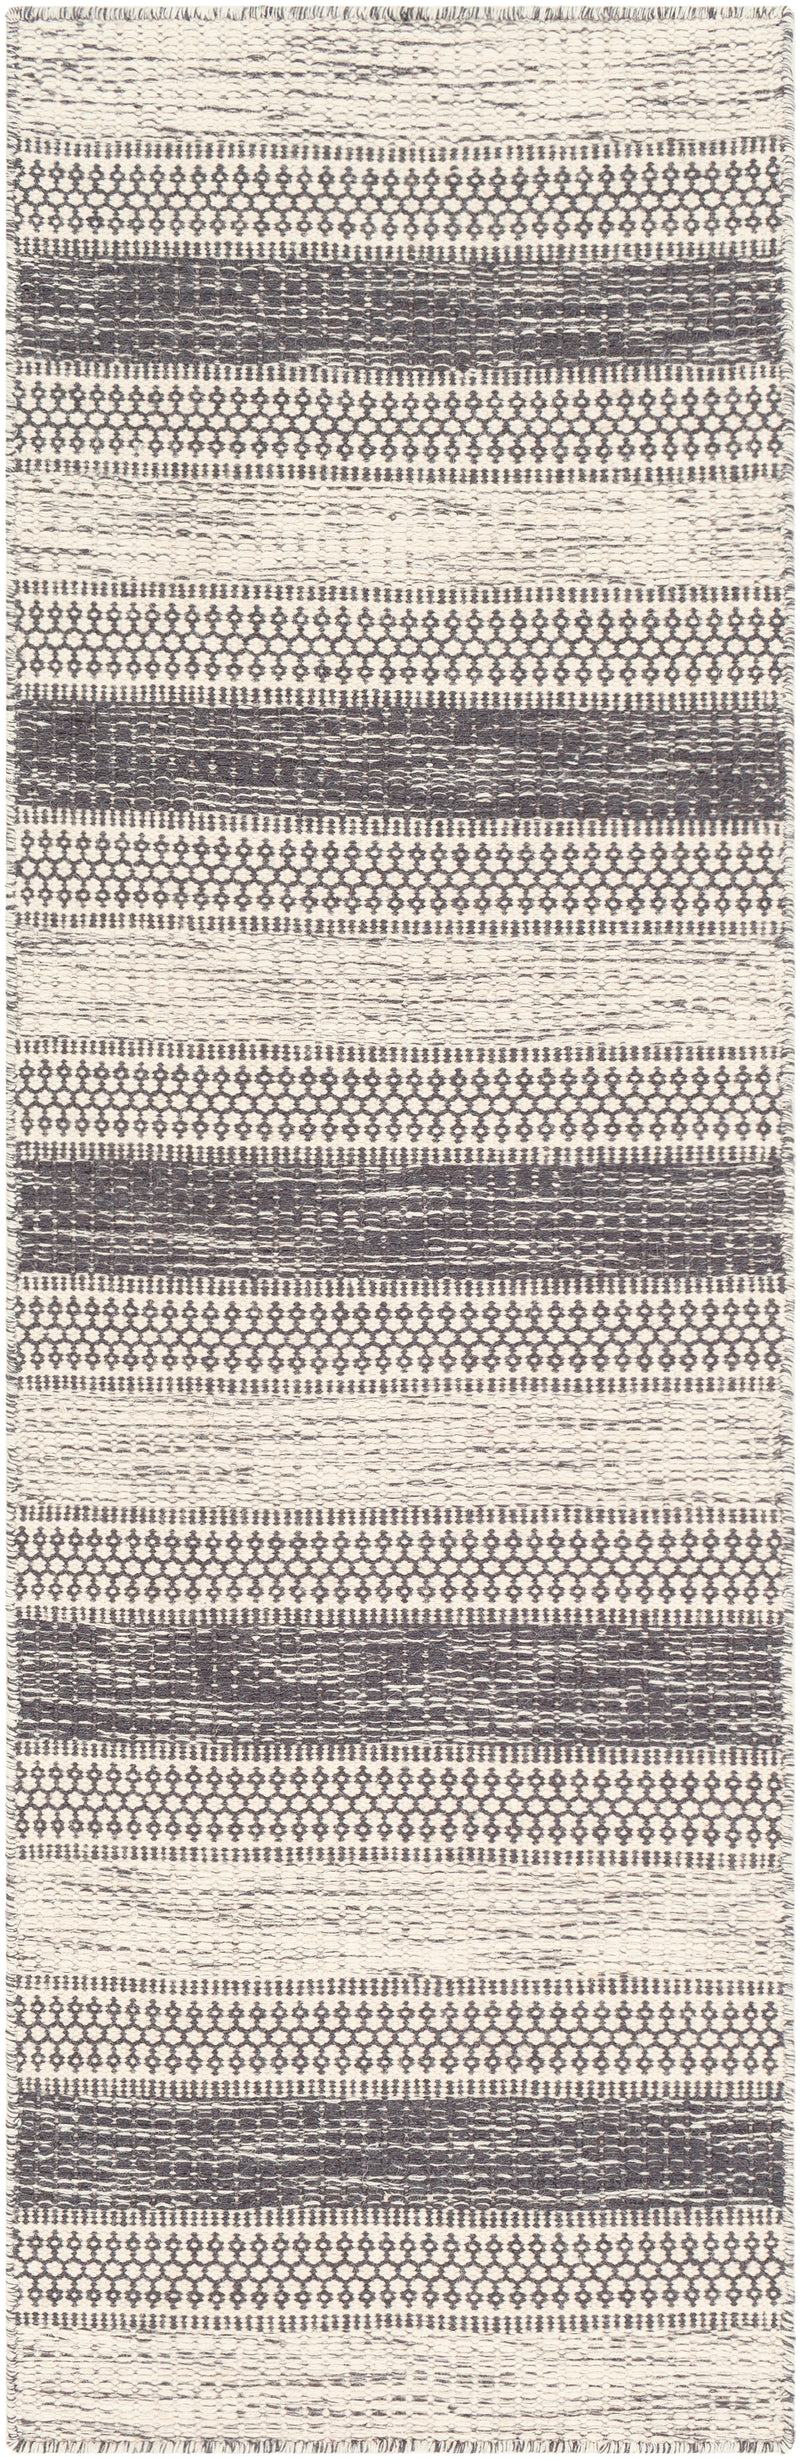 The Nadi rug comes in both runner and area rug sizes. 